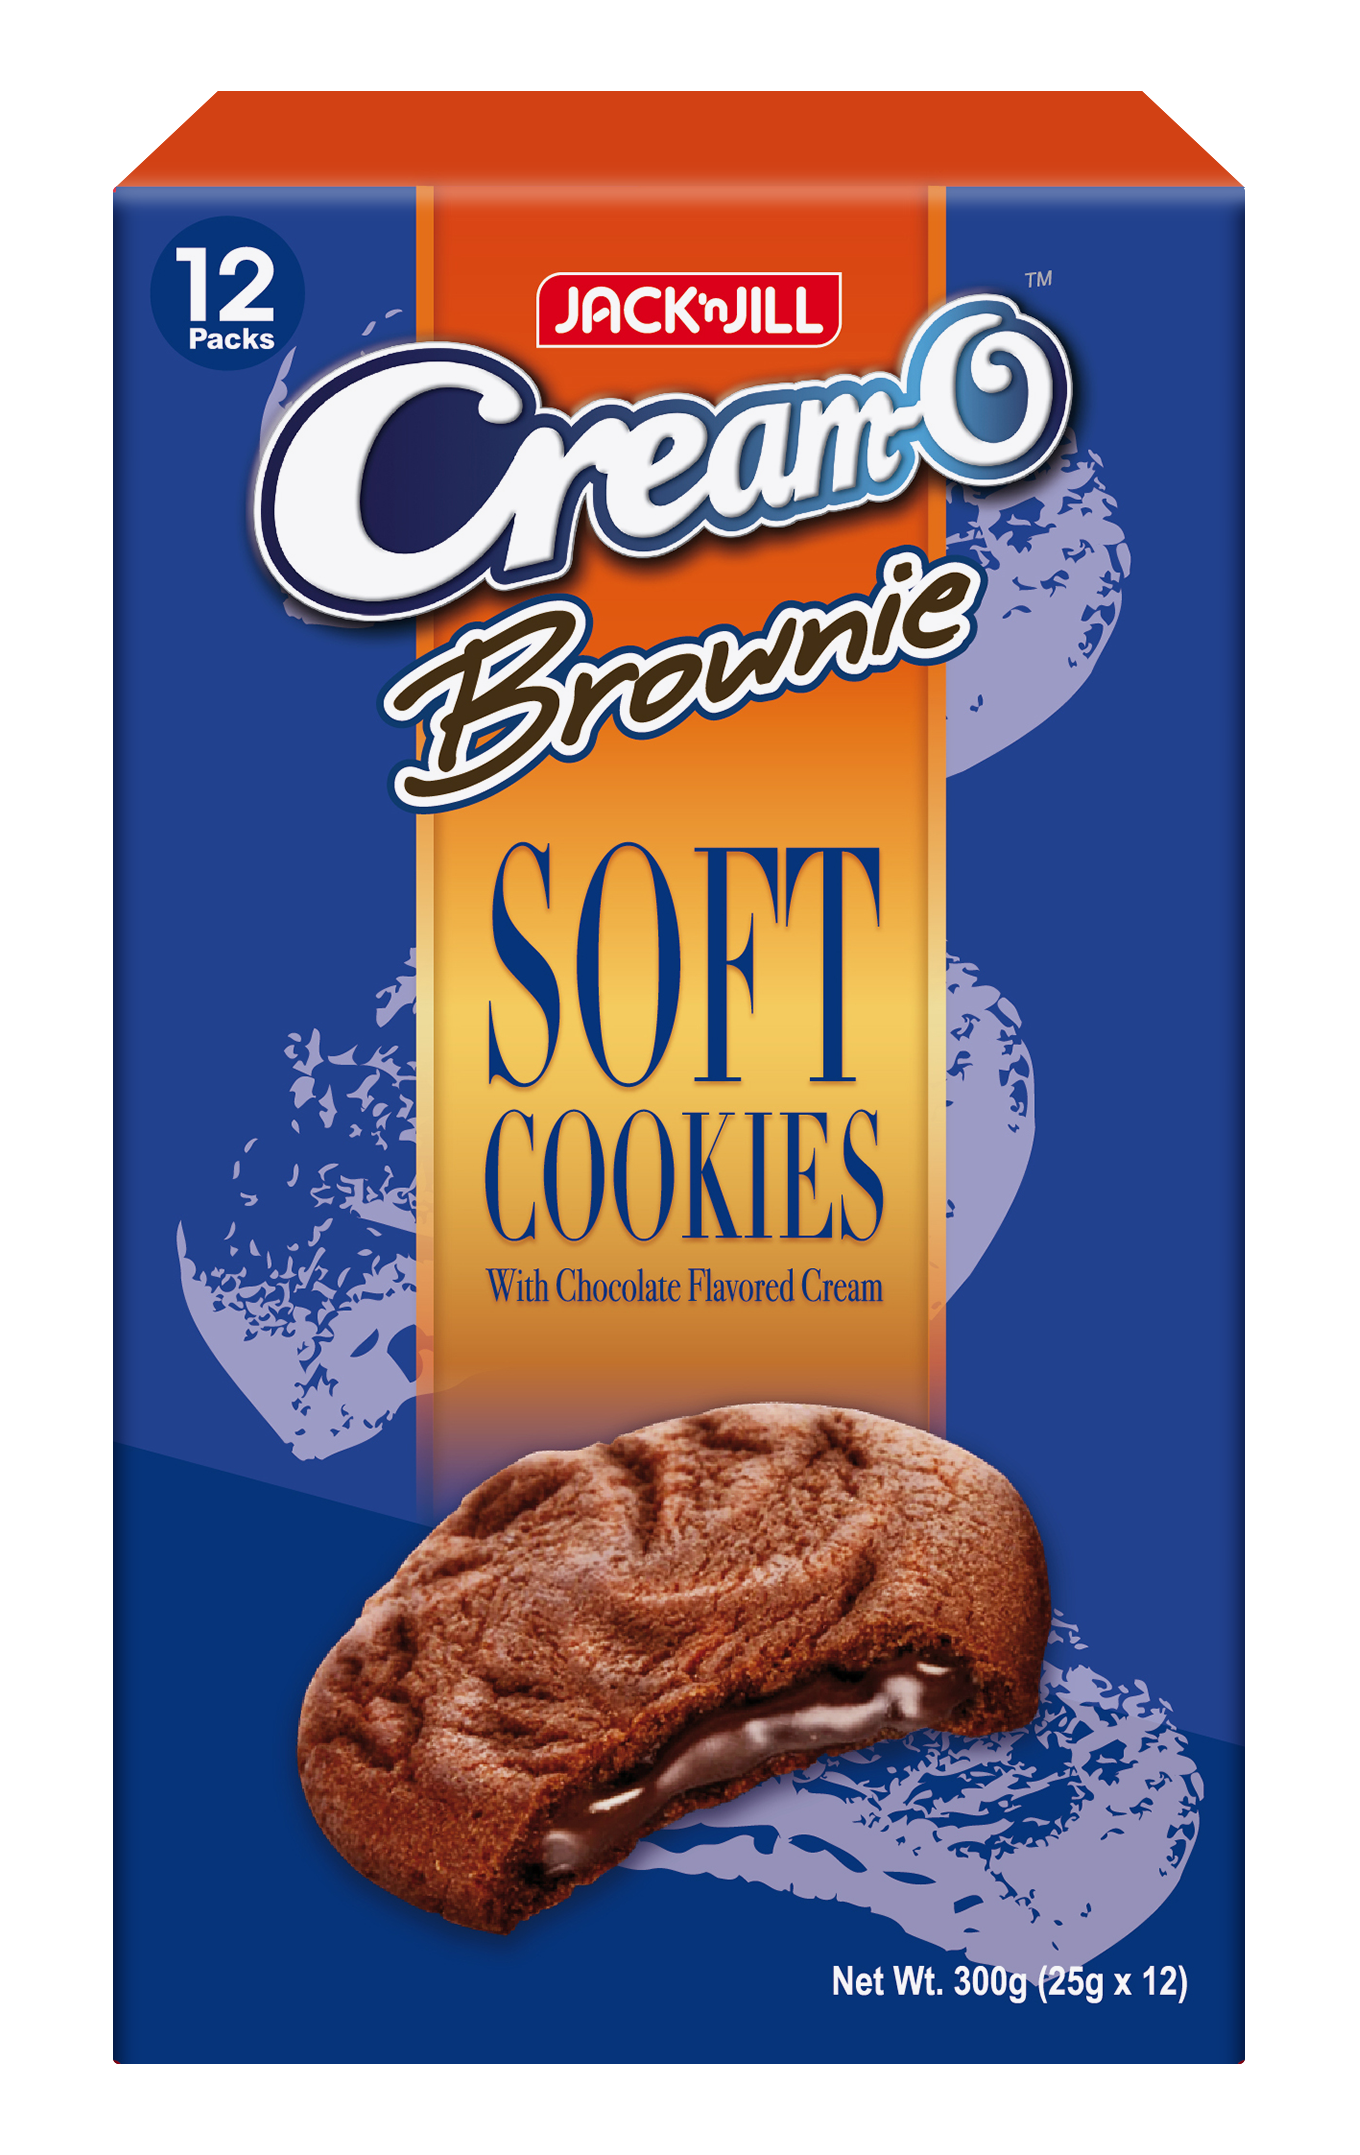 5 reasons the new, mouthwatering Cream-O Brownie Soft Cookies are #SnackGoals